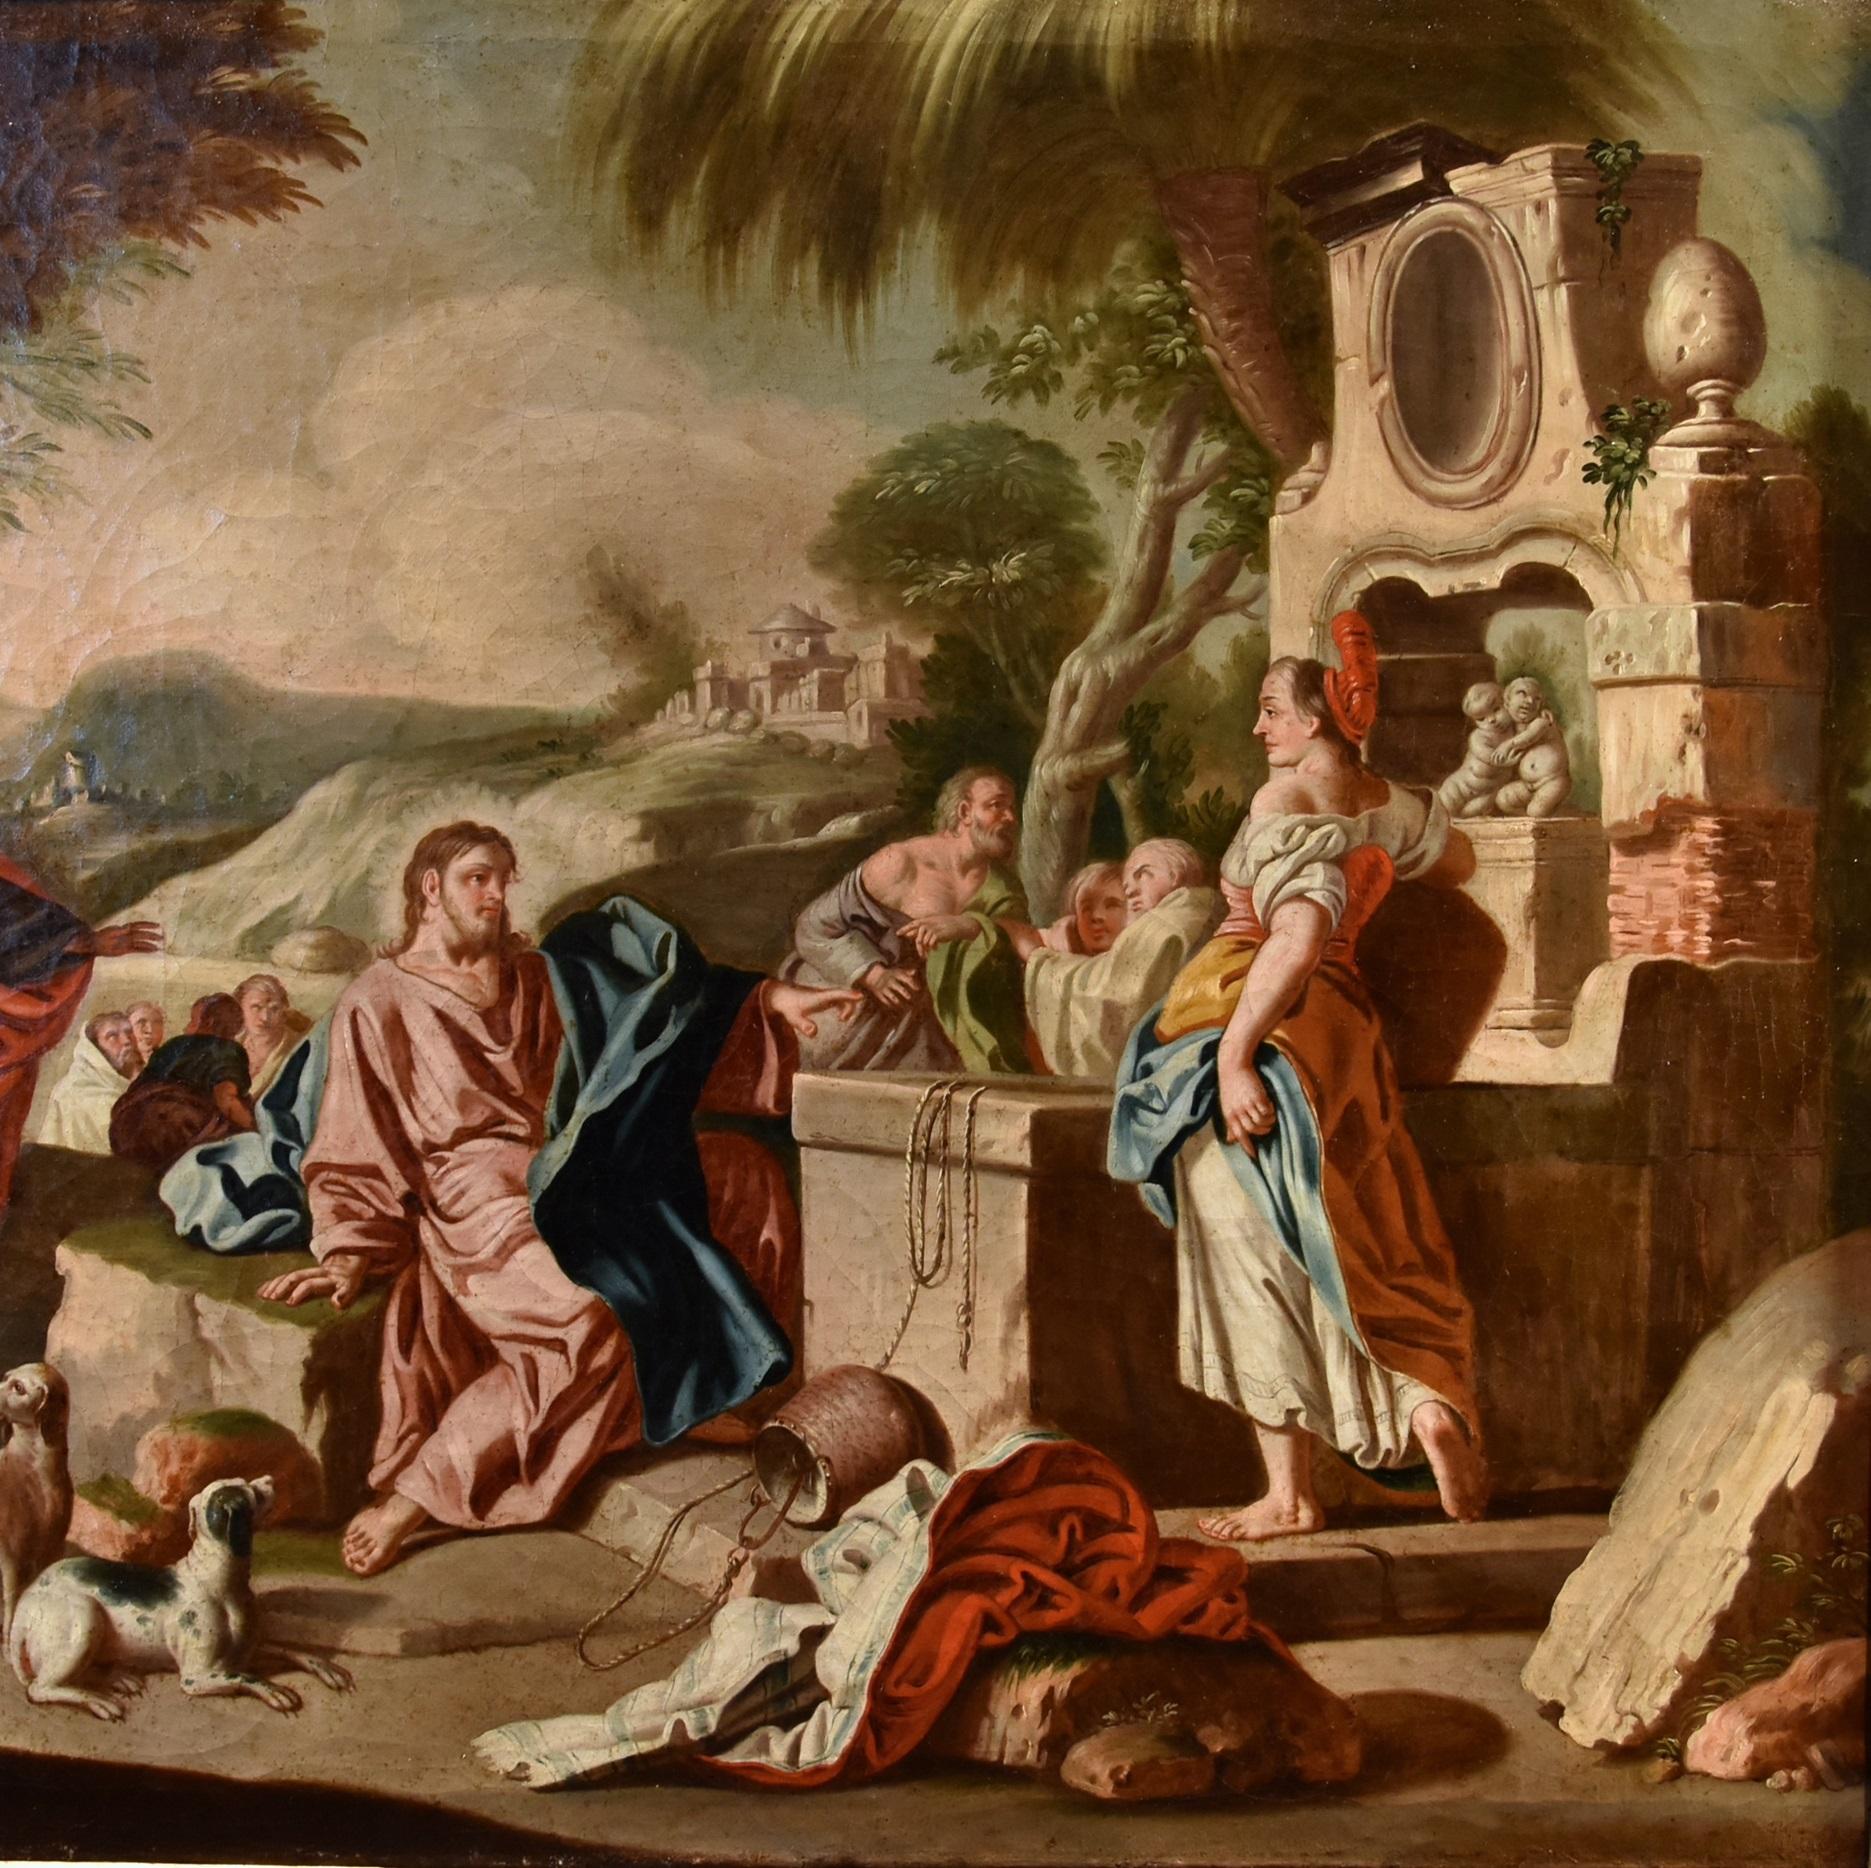 Francesco de Mura (Naples 1696-1782)

Christ and the Samaritan woman at the well

Oil painting on canvas (75 x 102 cm. - Framed 85 x 111 cm.)

Expertise of the prof. Emilio Negro (Bologna)

The valuable painting in question presents a well-known